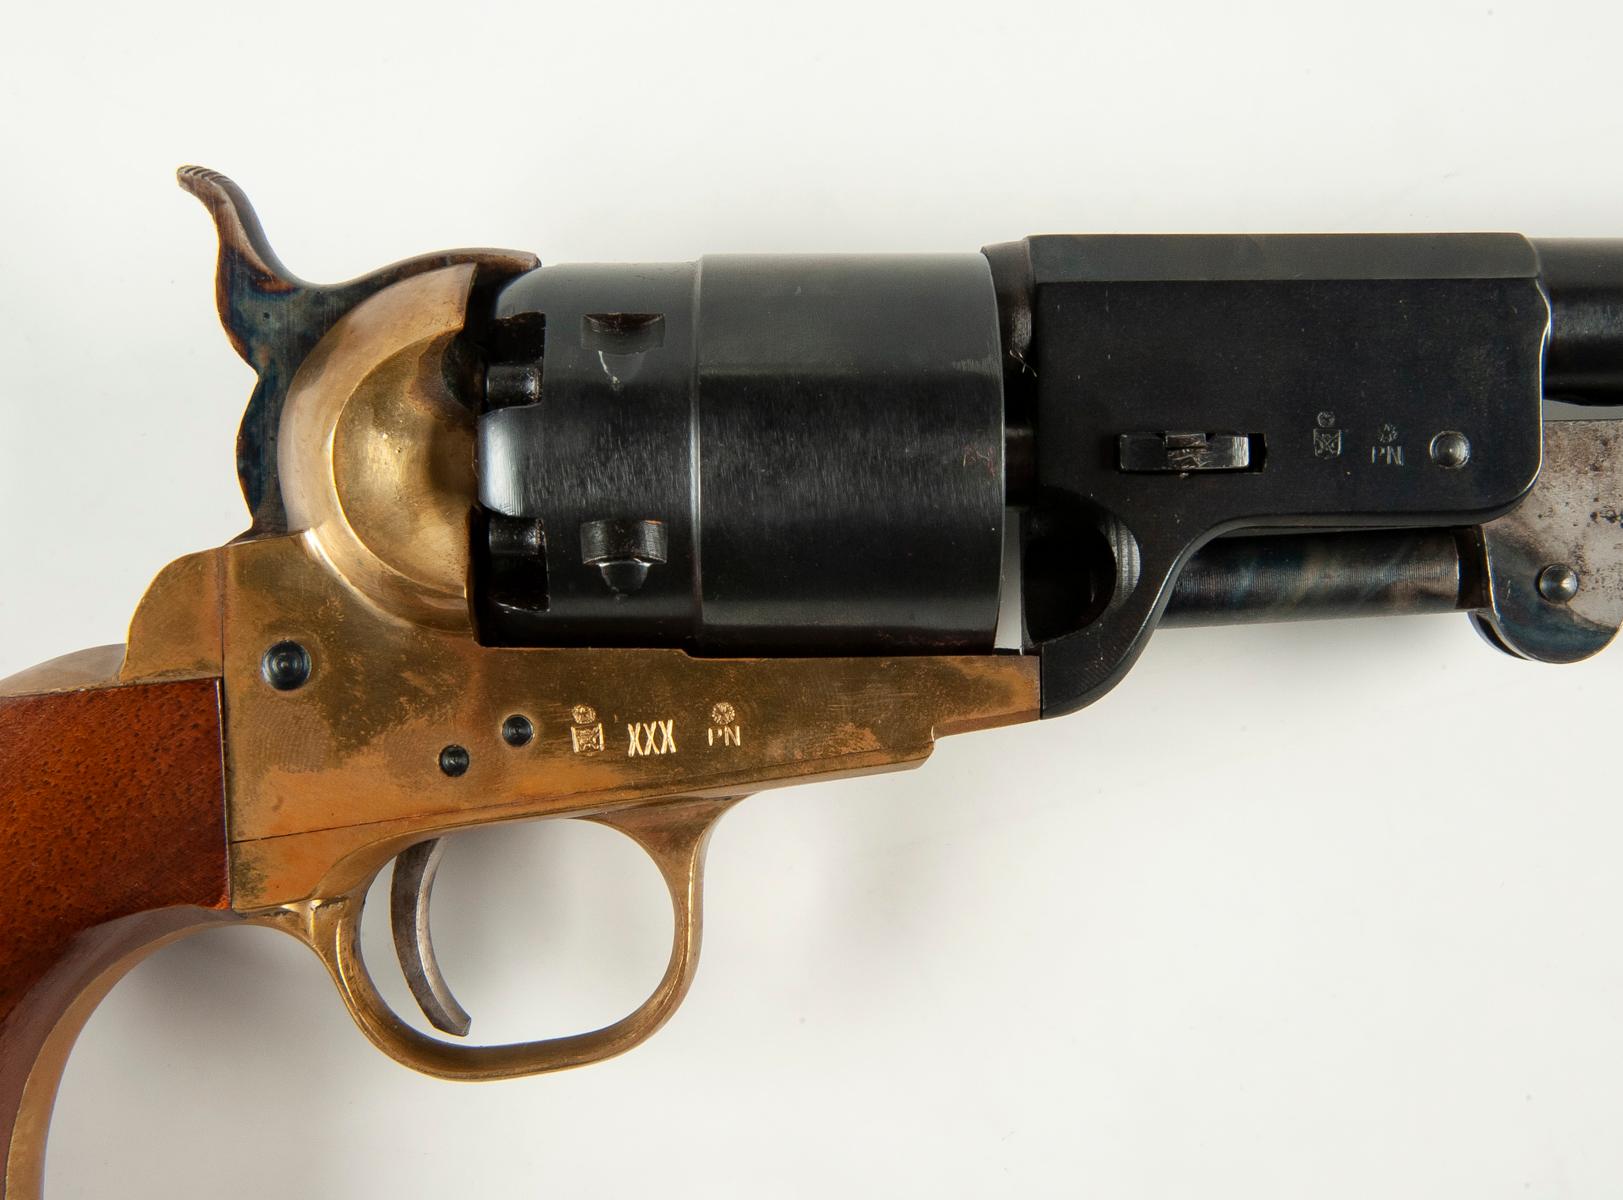 Repro Colt .44 Revolver & Accoutrements in Case